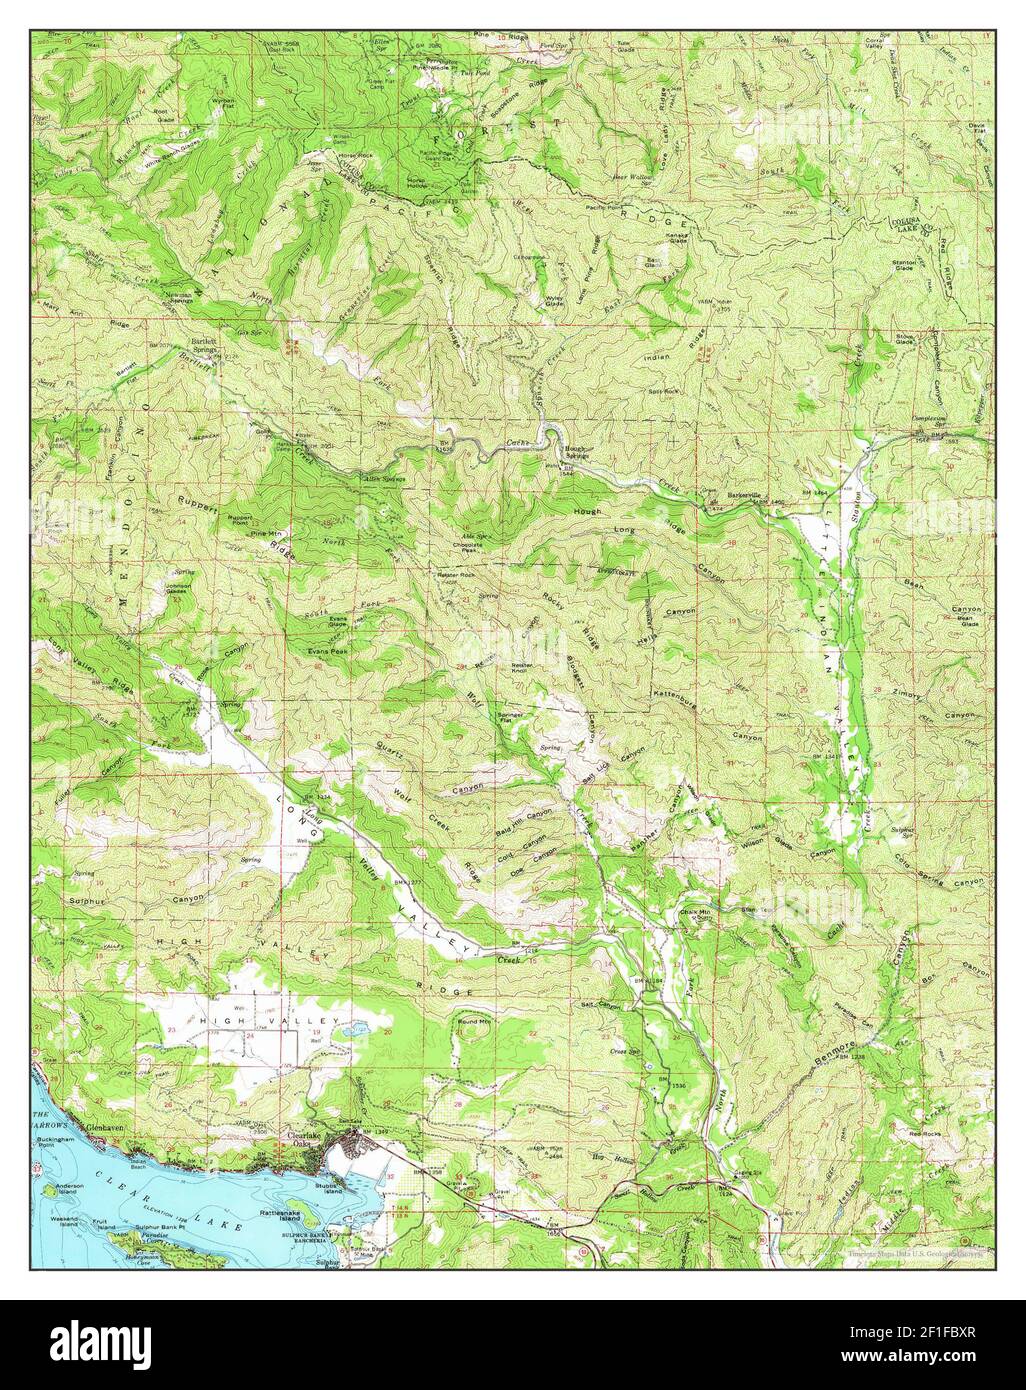 Clearlake Oaks, California, map 1960, 1:62500, United States of America by Timeless Maps, data U.S. Geological Survey Stock Photo